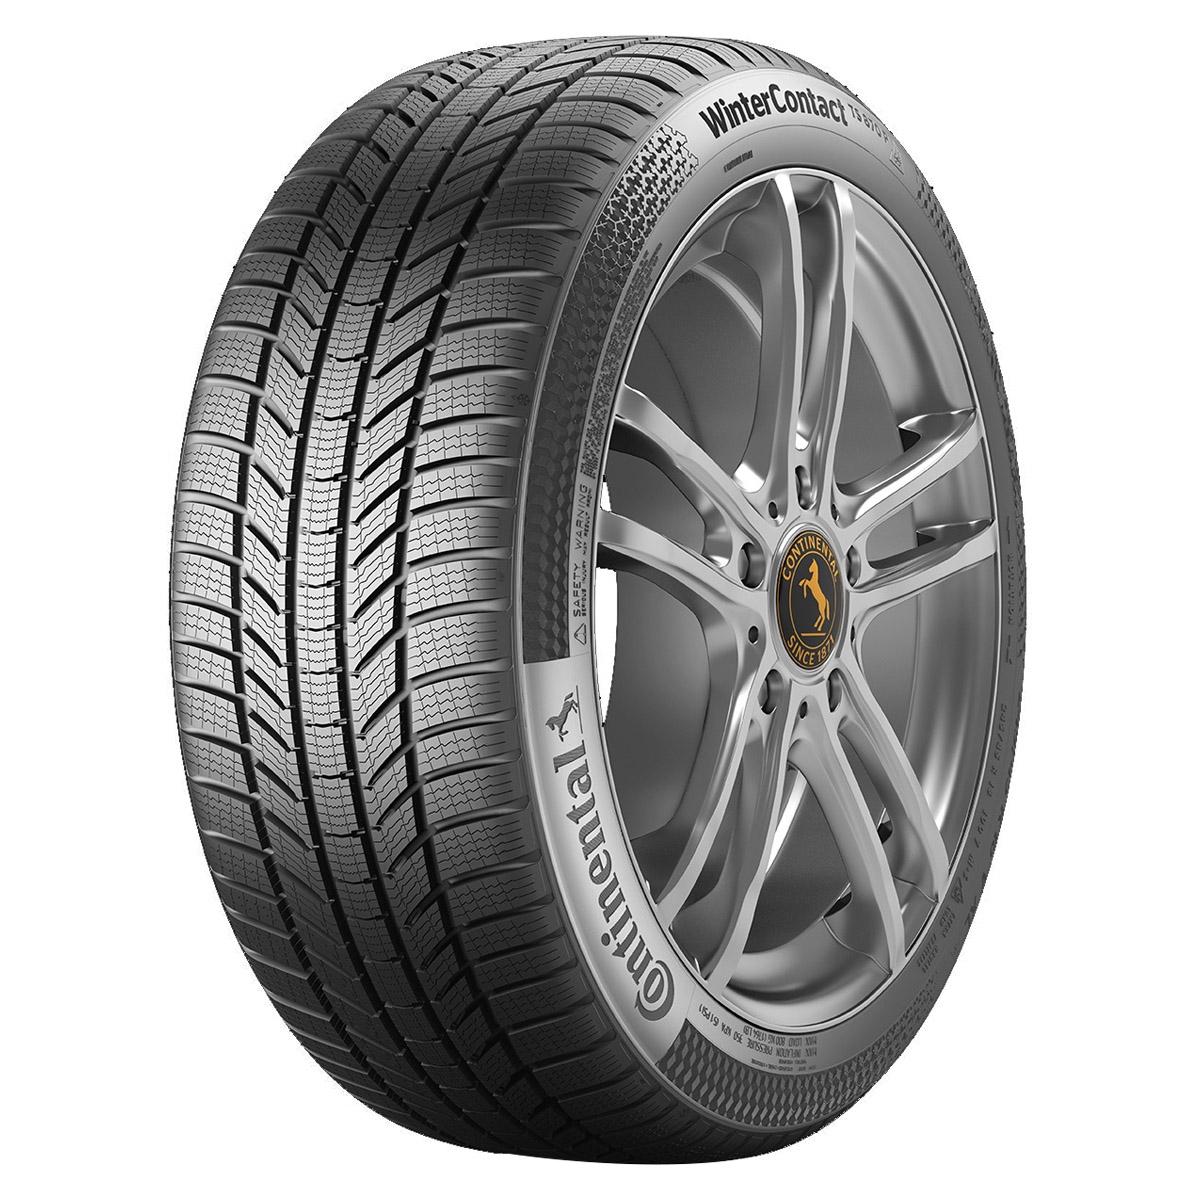 Anvelope iarna CONTINENTAL WINTER CONTACT TS870 P FR 235/55 R19 105T